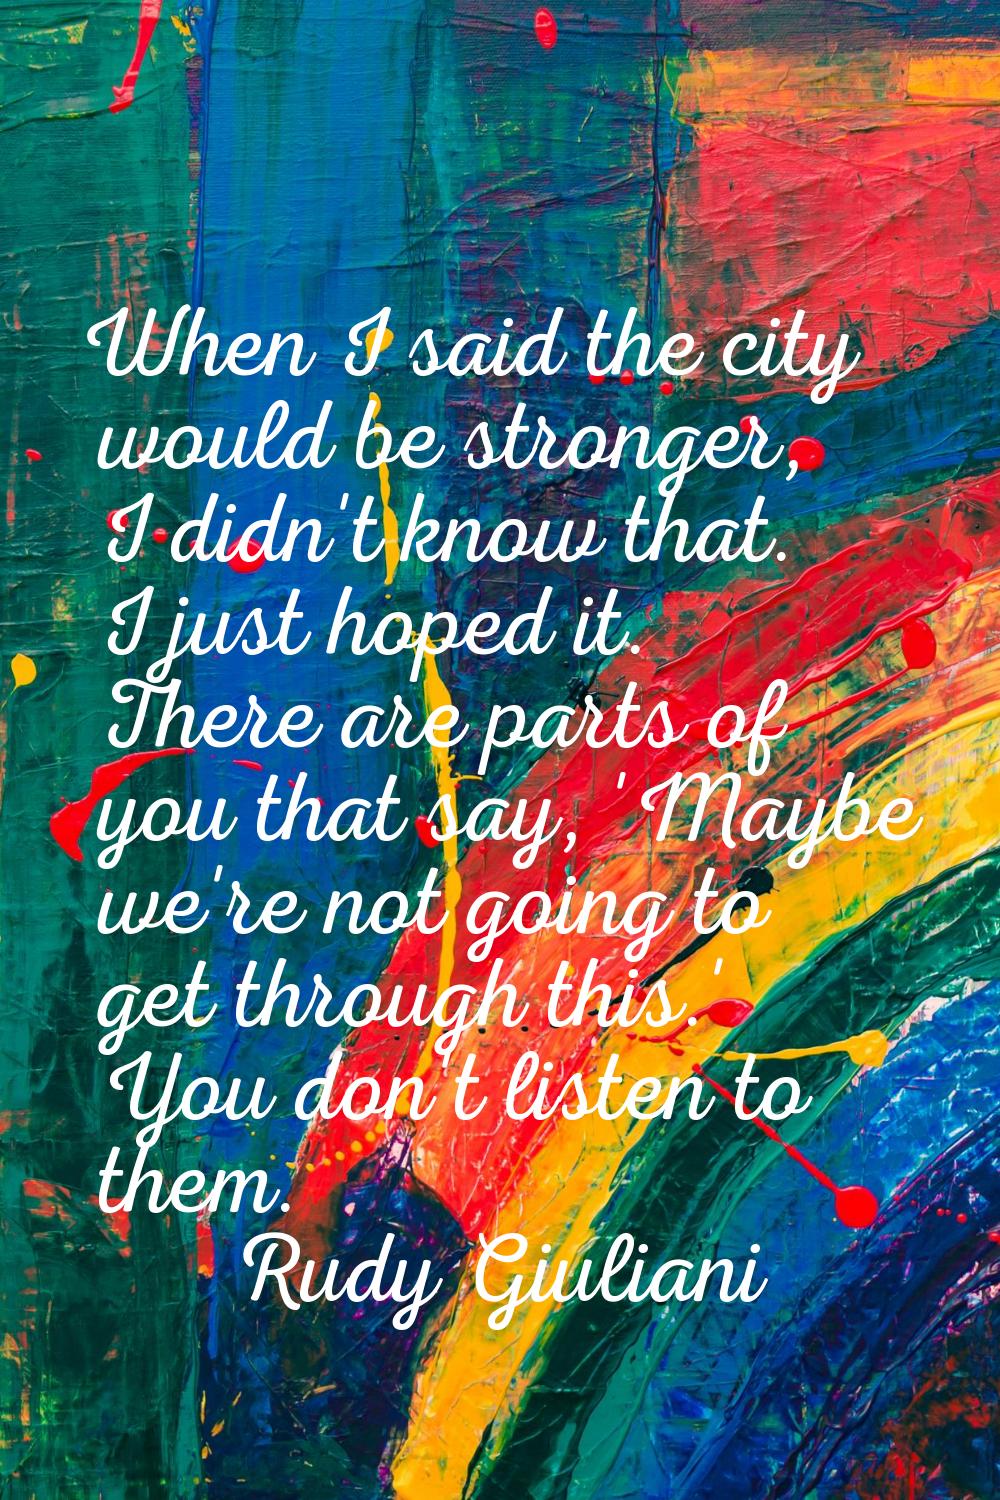 When I said the city would be stronger, I didn't know that. I just hoped it. There are parts of you